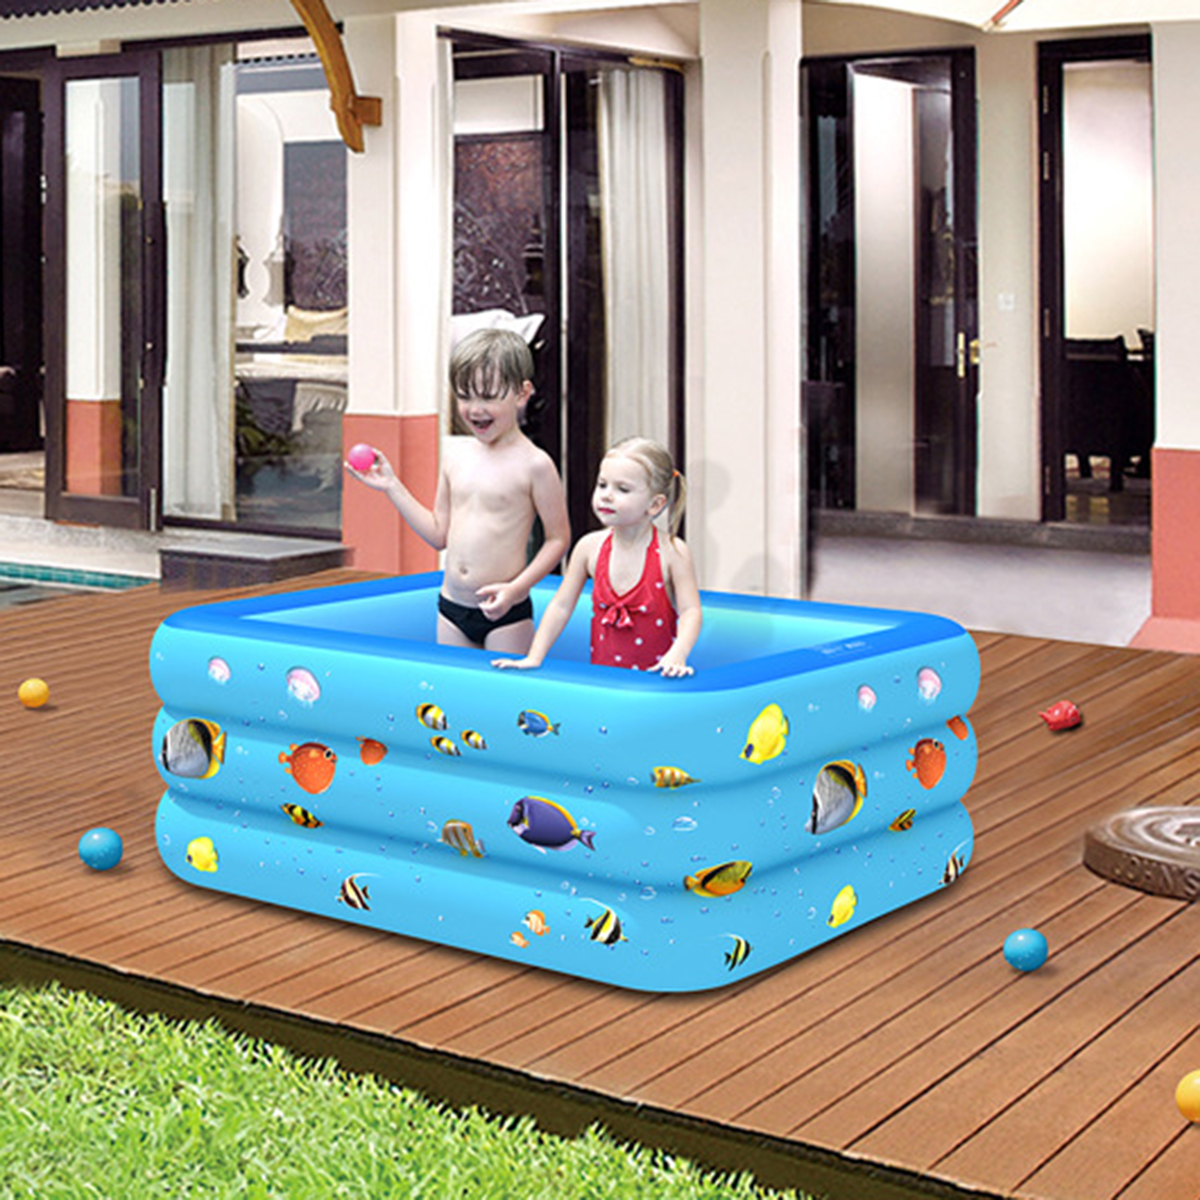 Inflatable-Swimming-Pool-Yard-Garden-Family-Kids-Play-Backyard-Blow-Up-Paddling-Pool-Bathing-Tub-Out-1689353-10